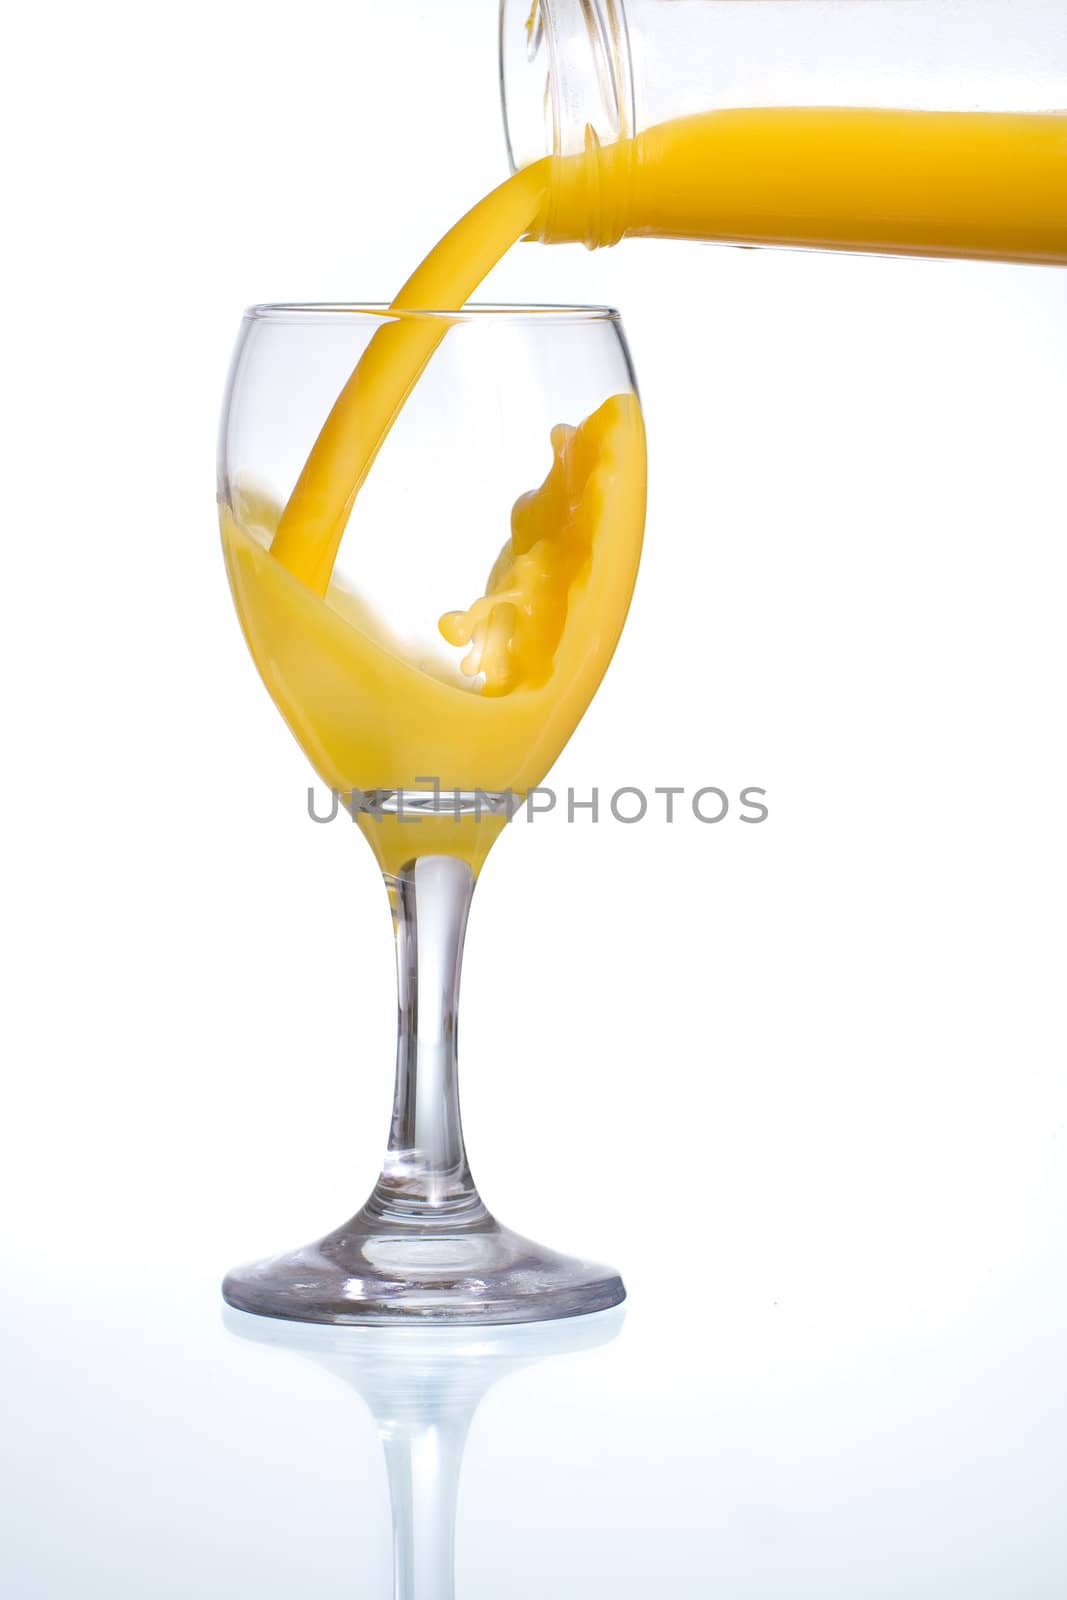 Pouring fresh orange juice in a glass with reflection